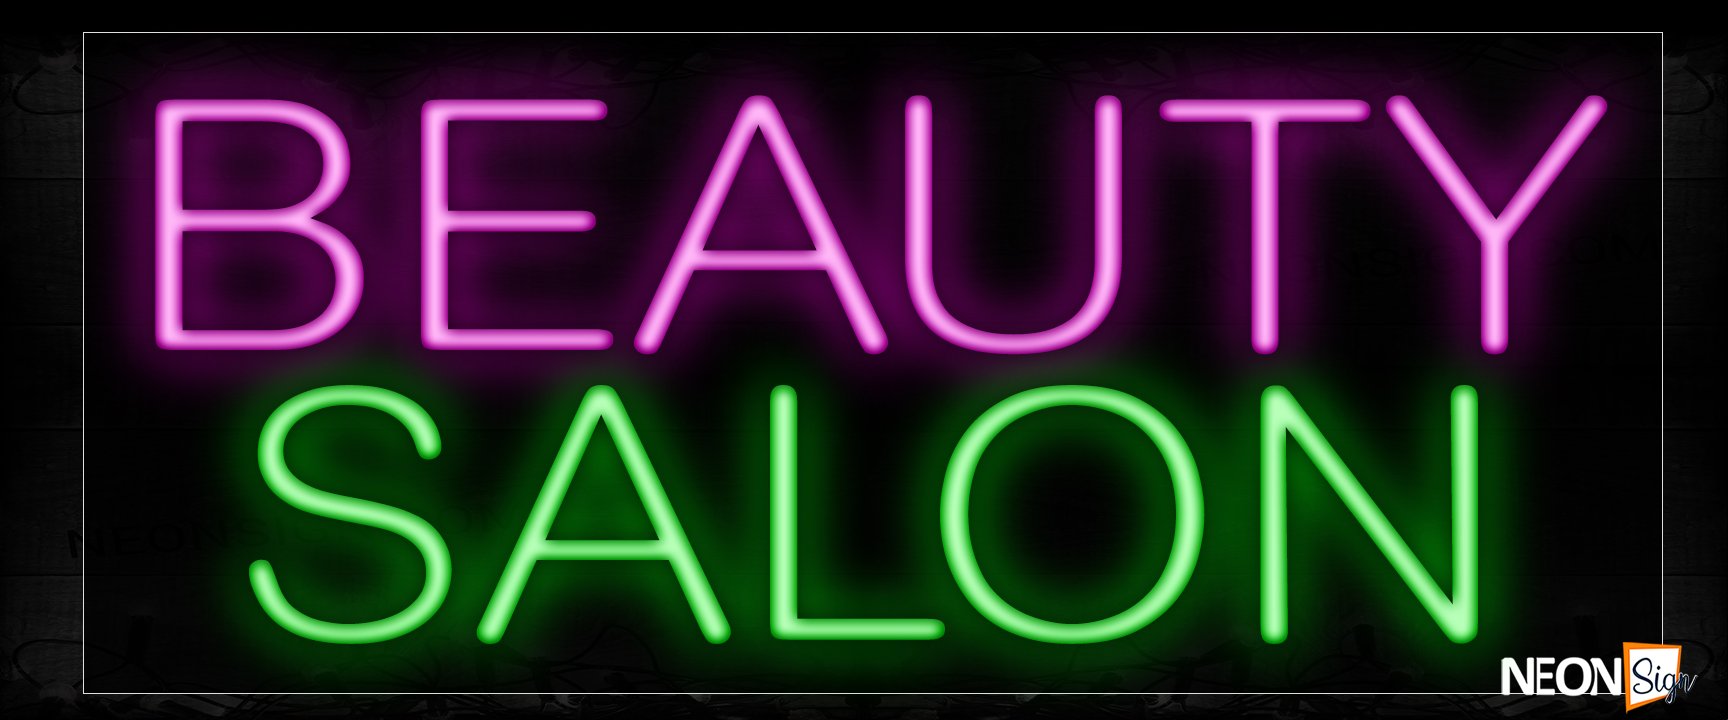 Image of Beauty Salon With Simple All Caps Text Neon Sign